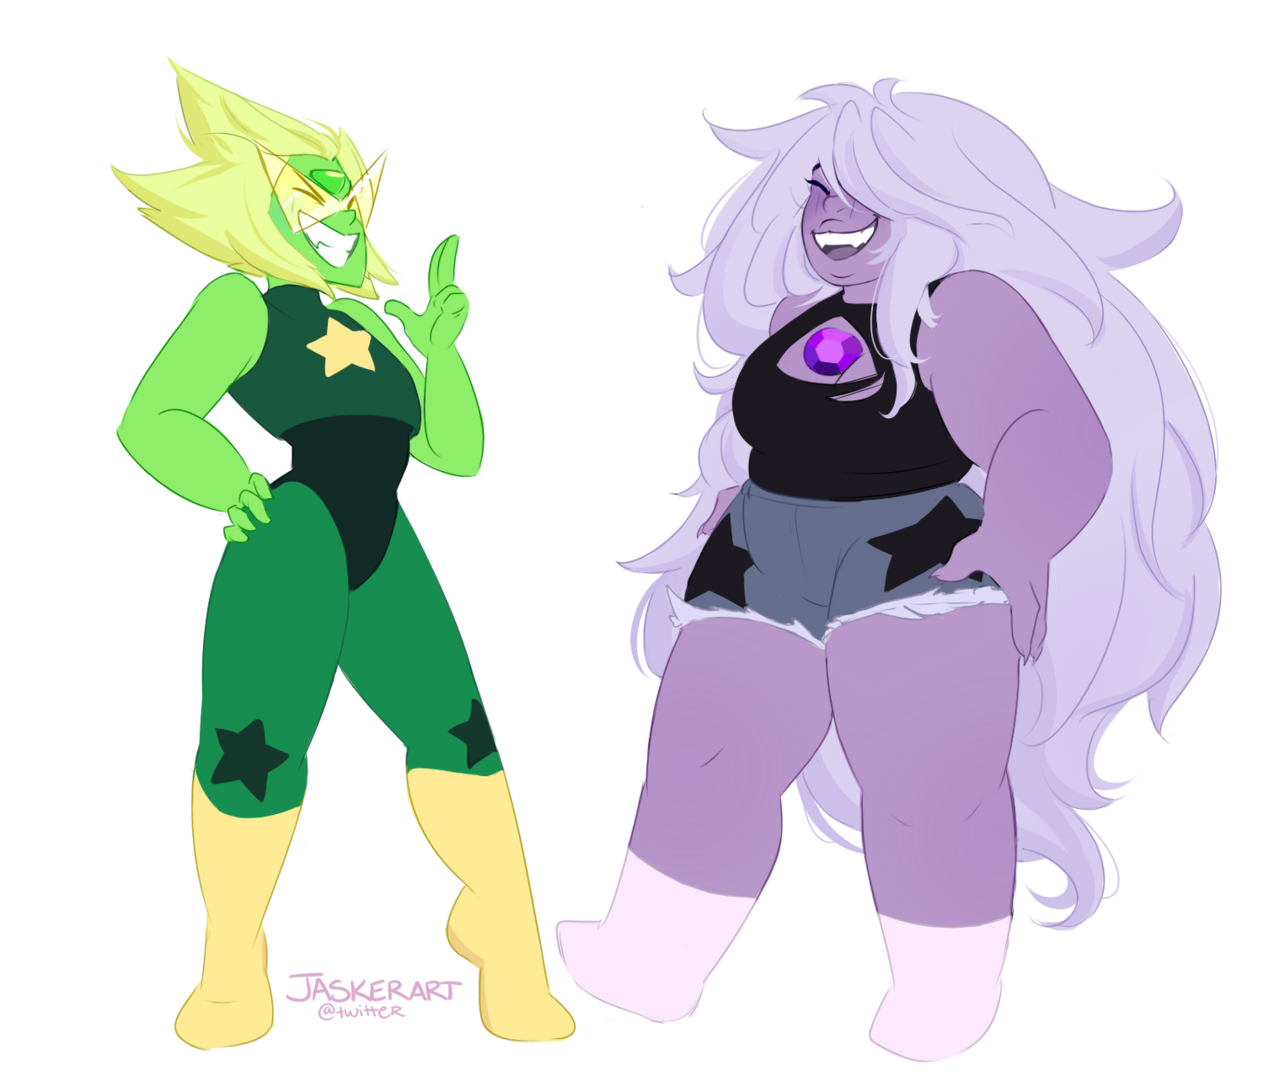 FINALLY, all the original gems are back together again!!!! AND with amazing new looks!! AHHH i’m so happy i can draw them all together ;♡;